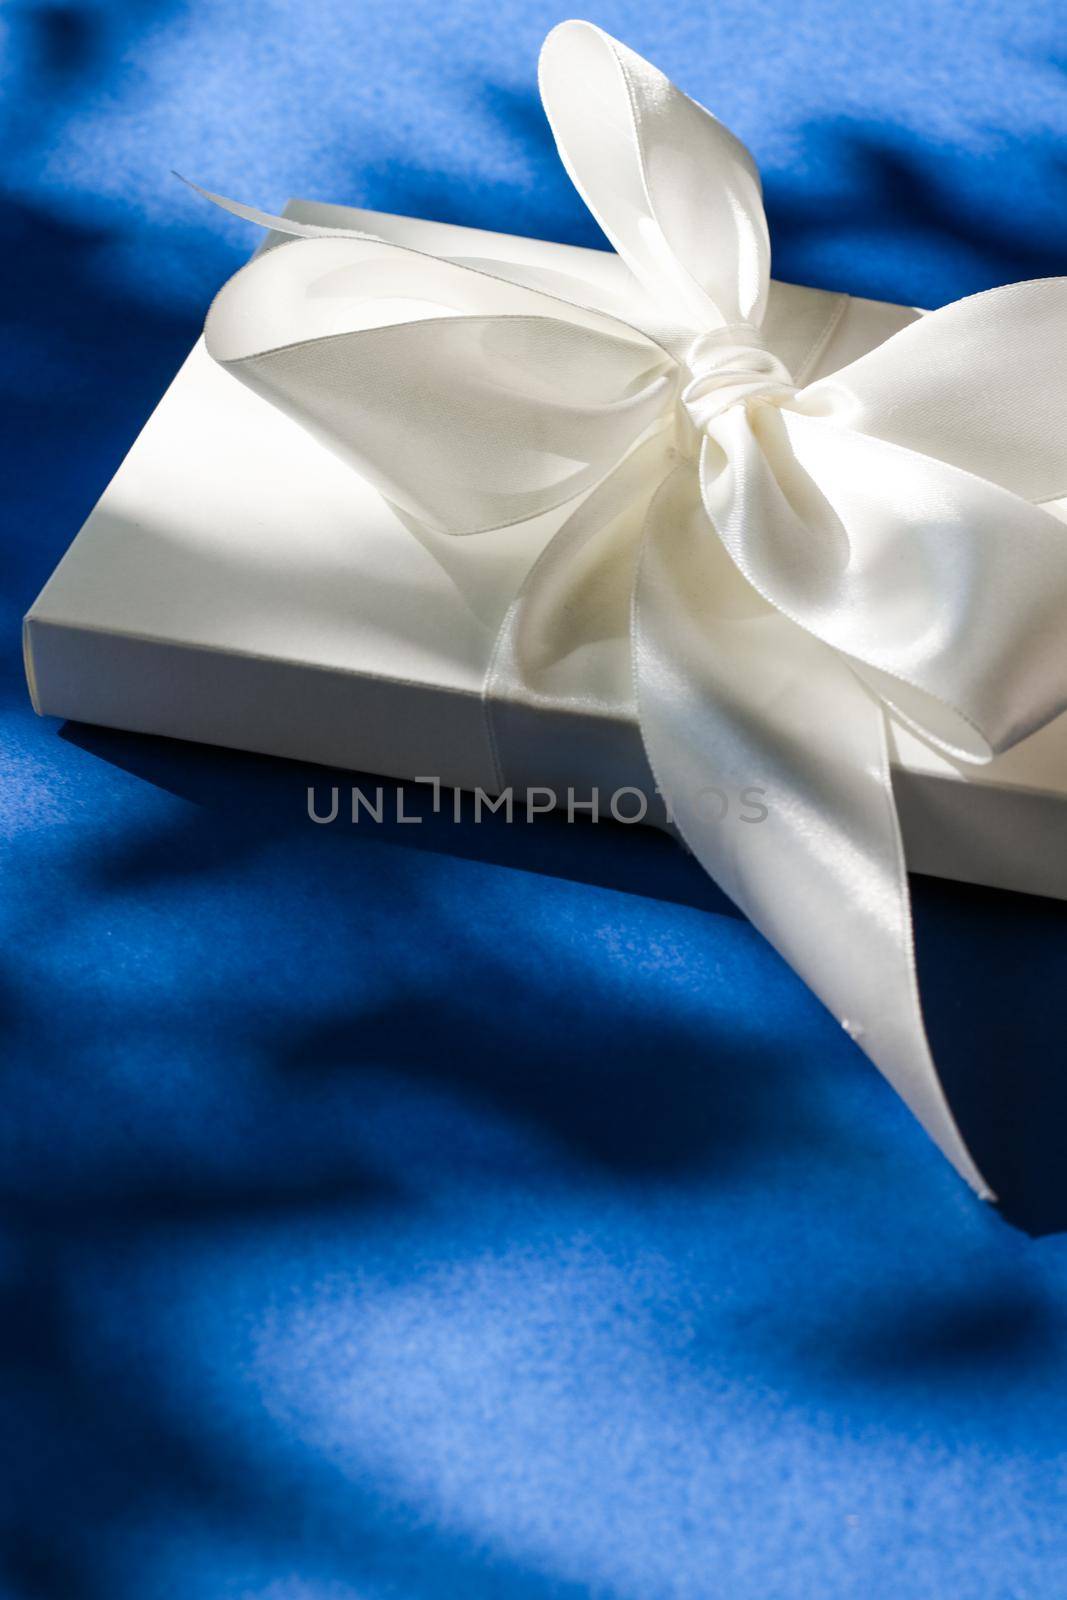 Anniversary celebration, shop sale promotion and bridal surprise concept - Luxury holiday white gift box with silk ribbon and bow on blue background, luxe wedding or birthday present